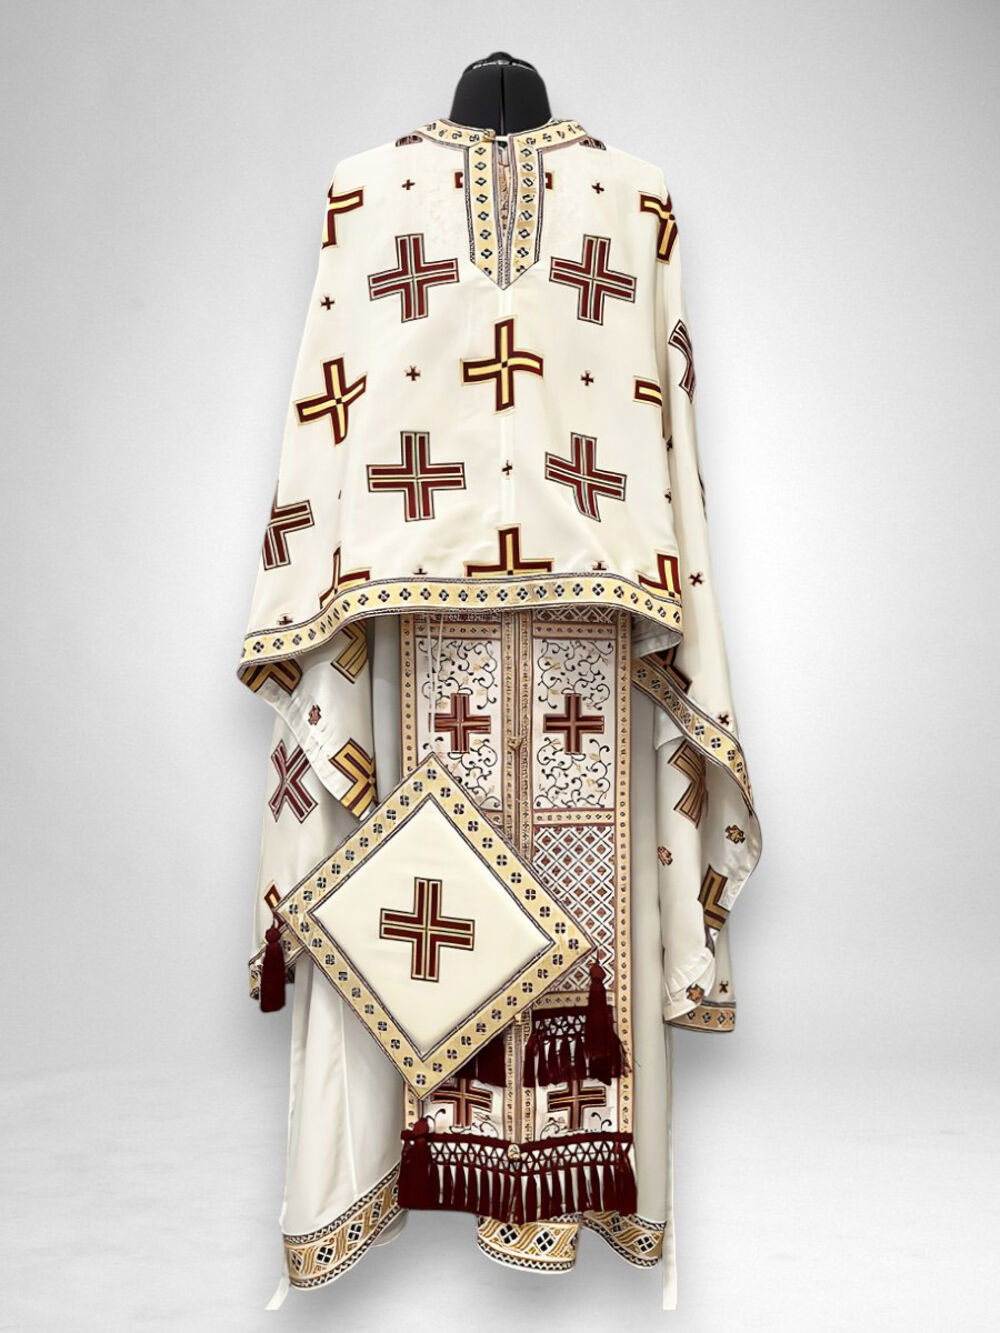 Coupon for Greek priestly vestments